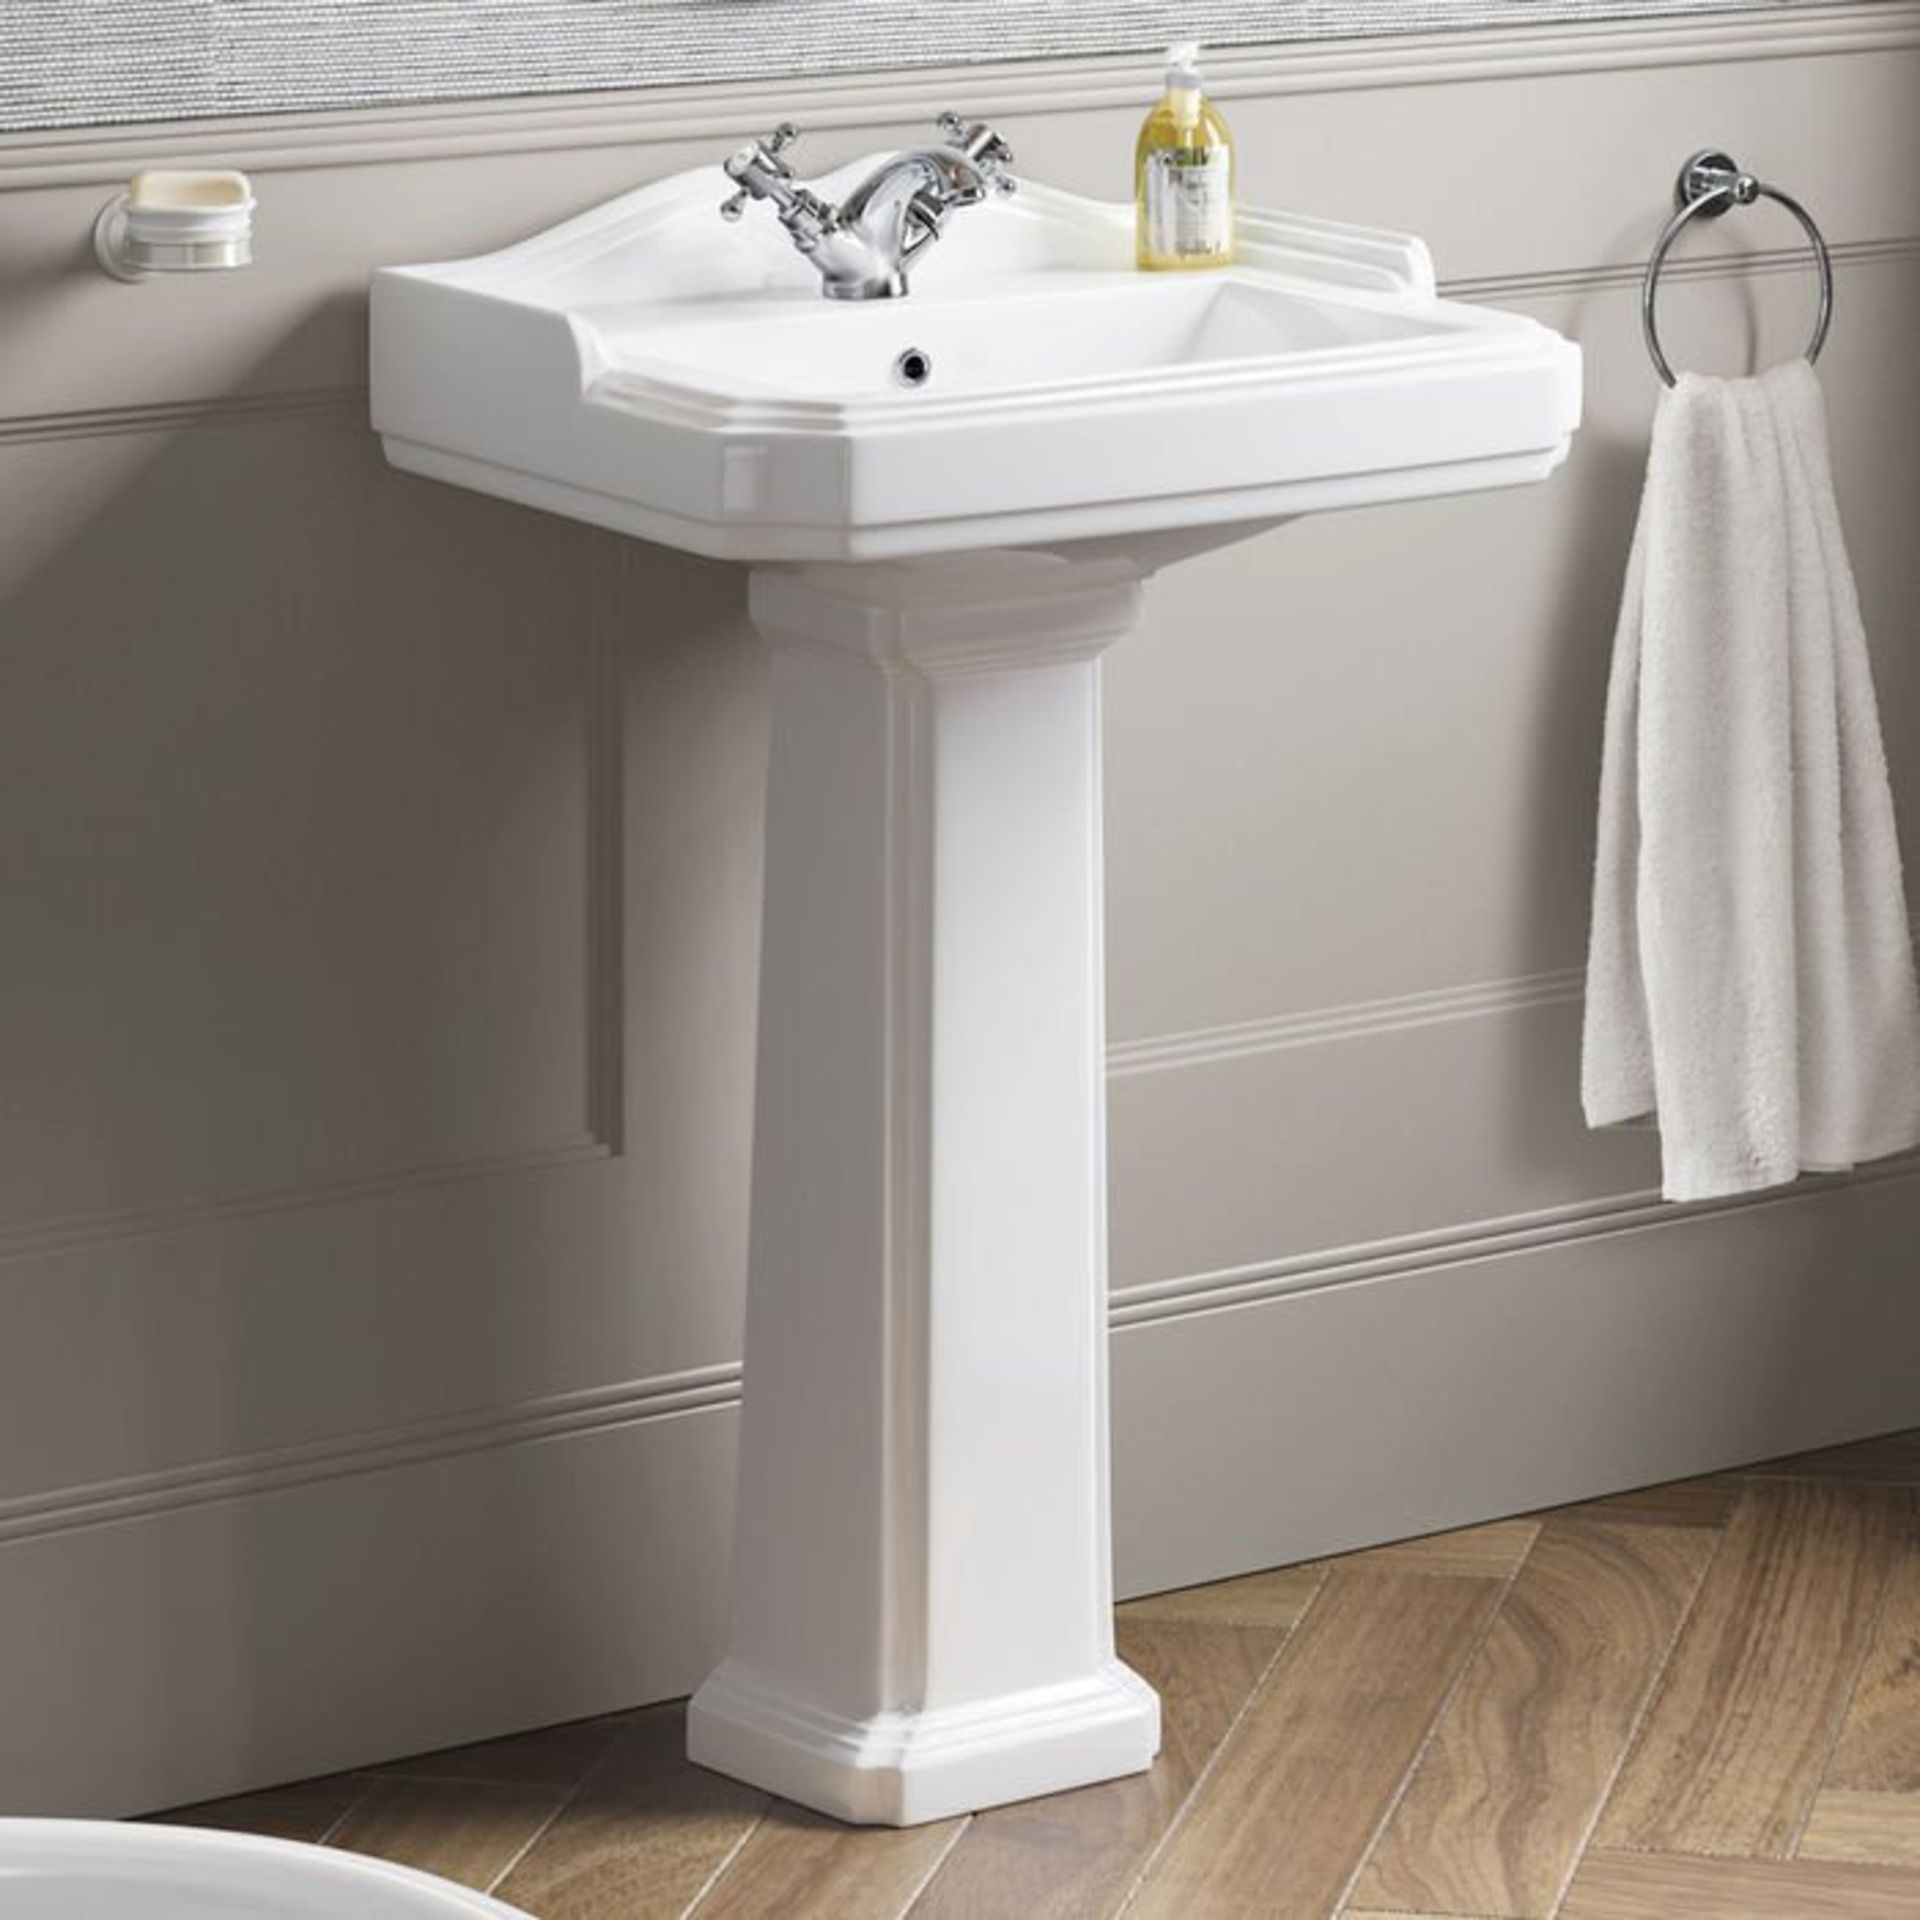 (H78) Victoria Basin & Pedestal - Single Tap Hole RRP £178.99 Made from White Vitreous China and